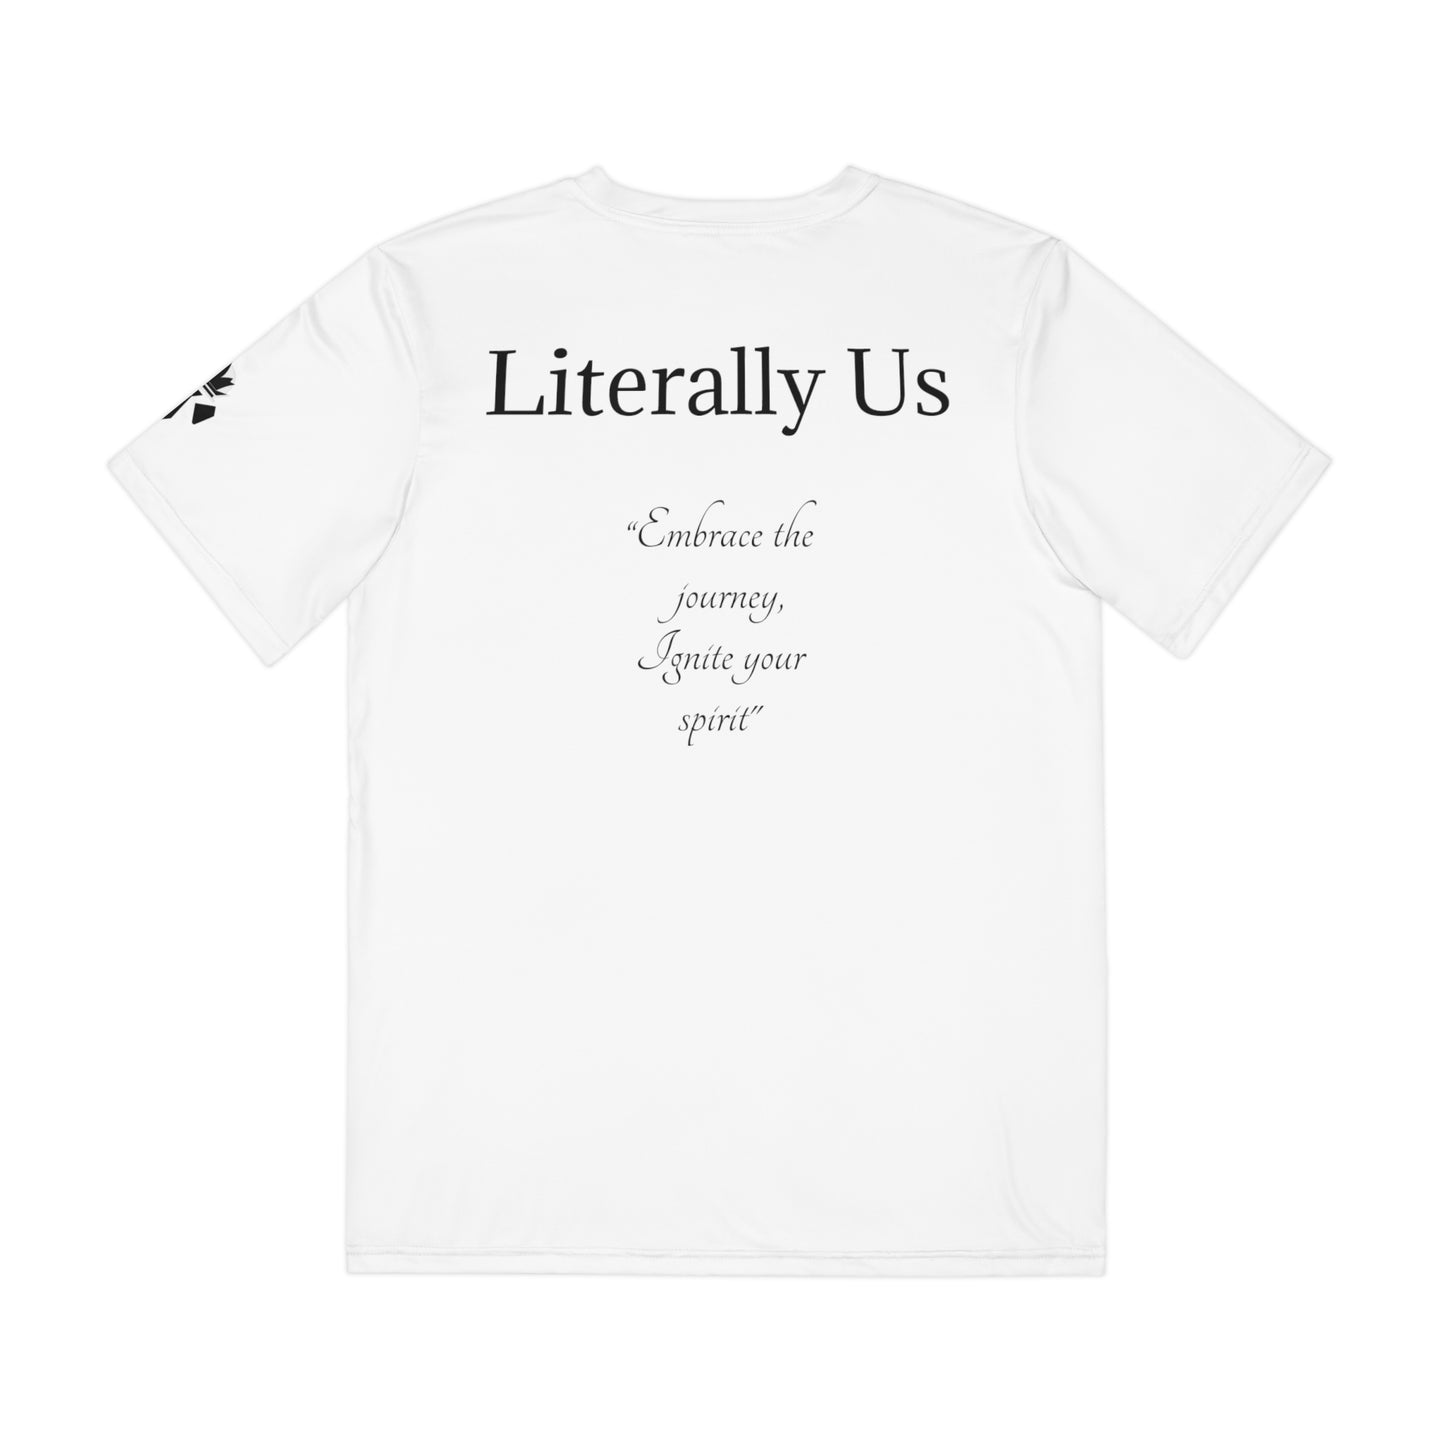 Monster Lisa Literally Us Quote T-shirt